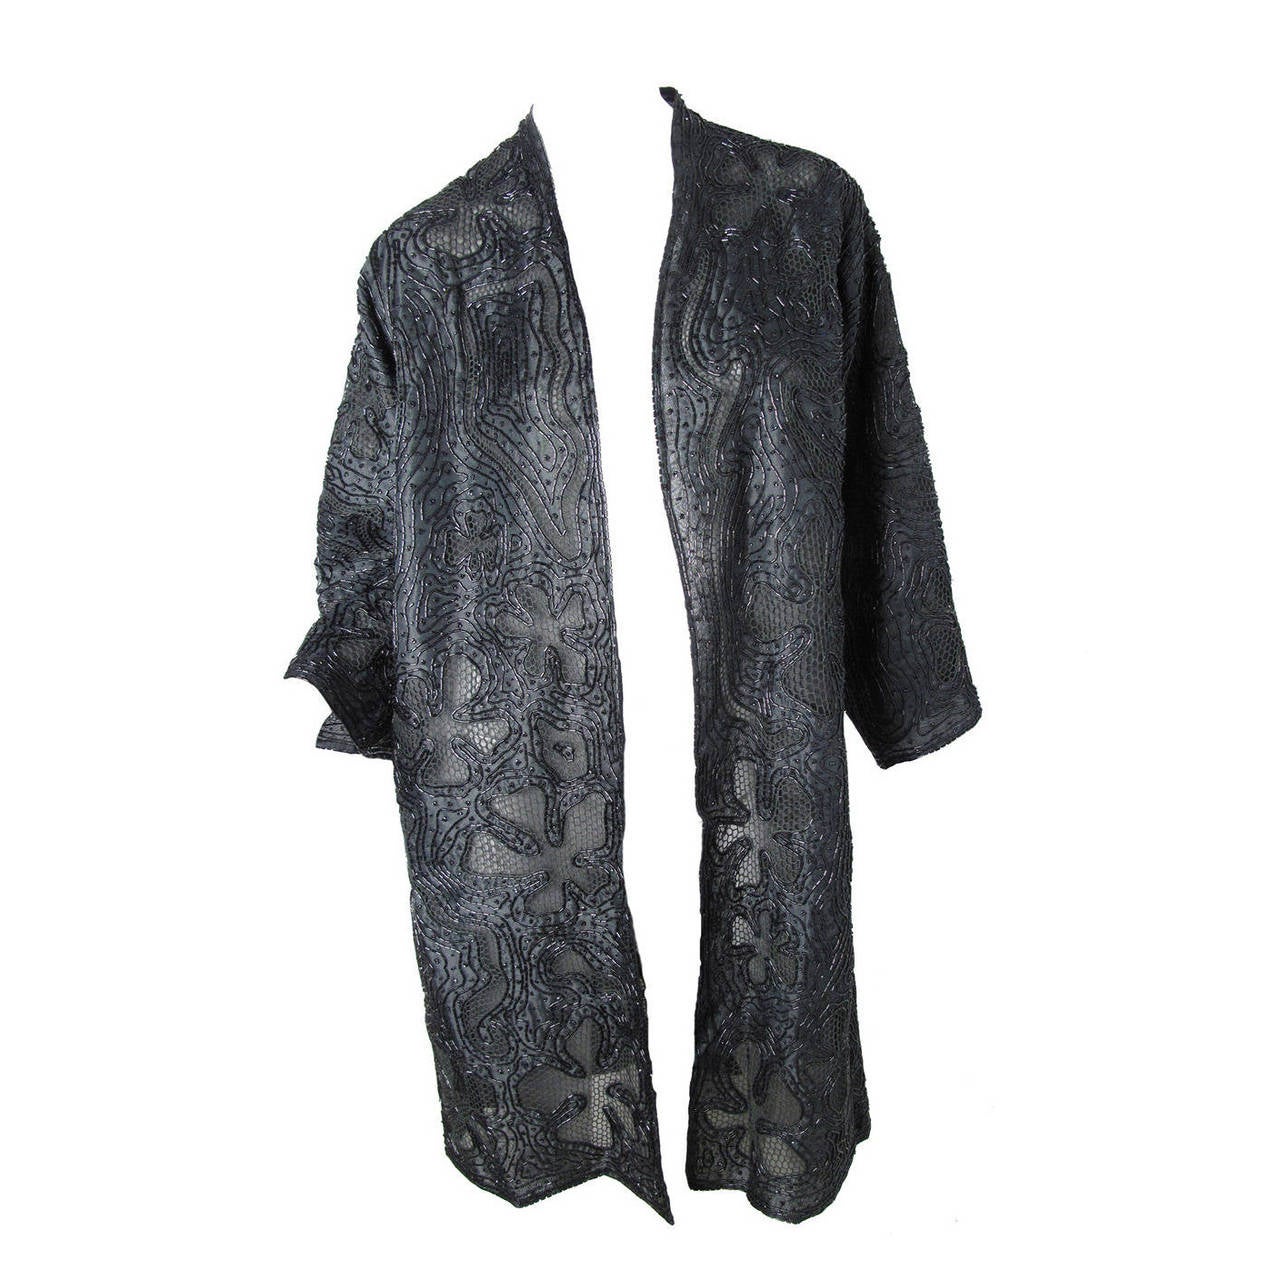 Rare Late 70s - early 80s Halston Beaded Lace Evening Coat